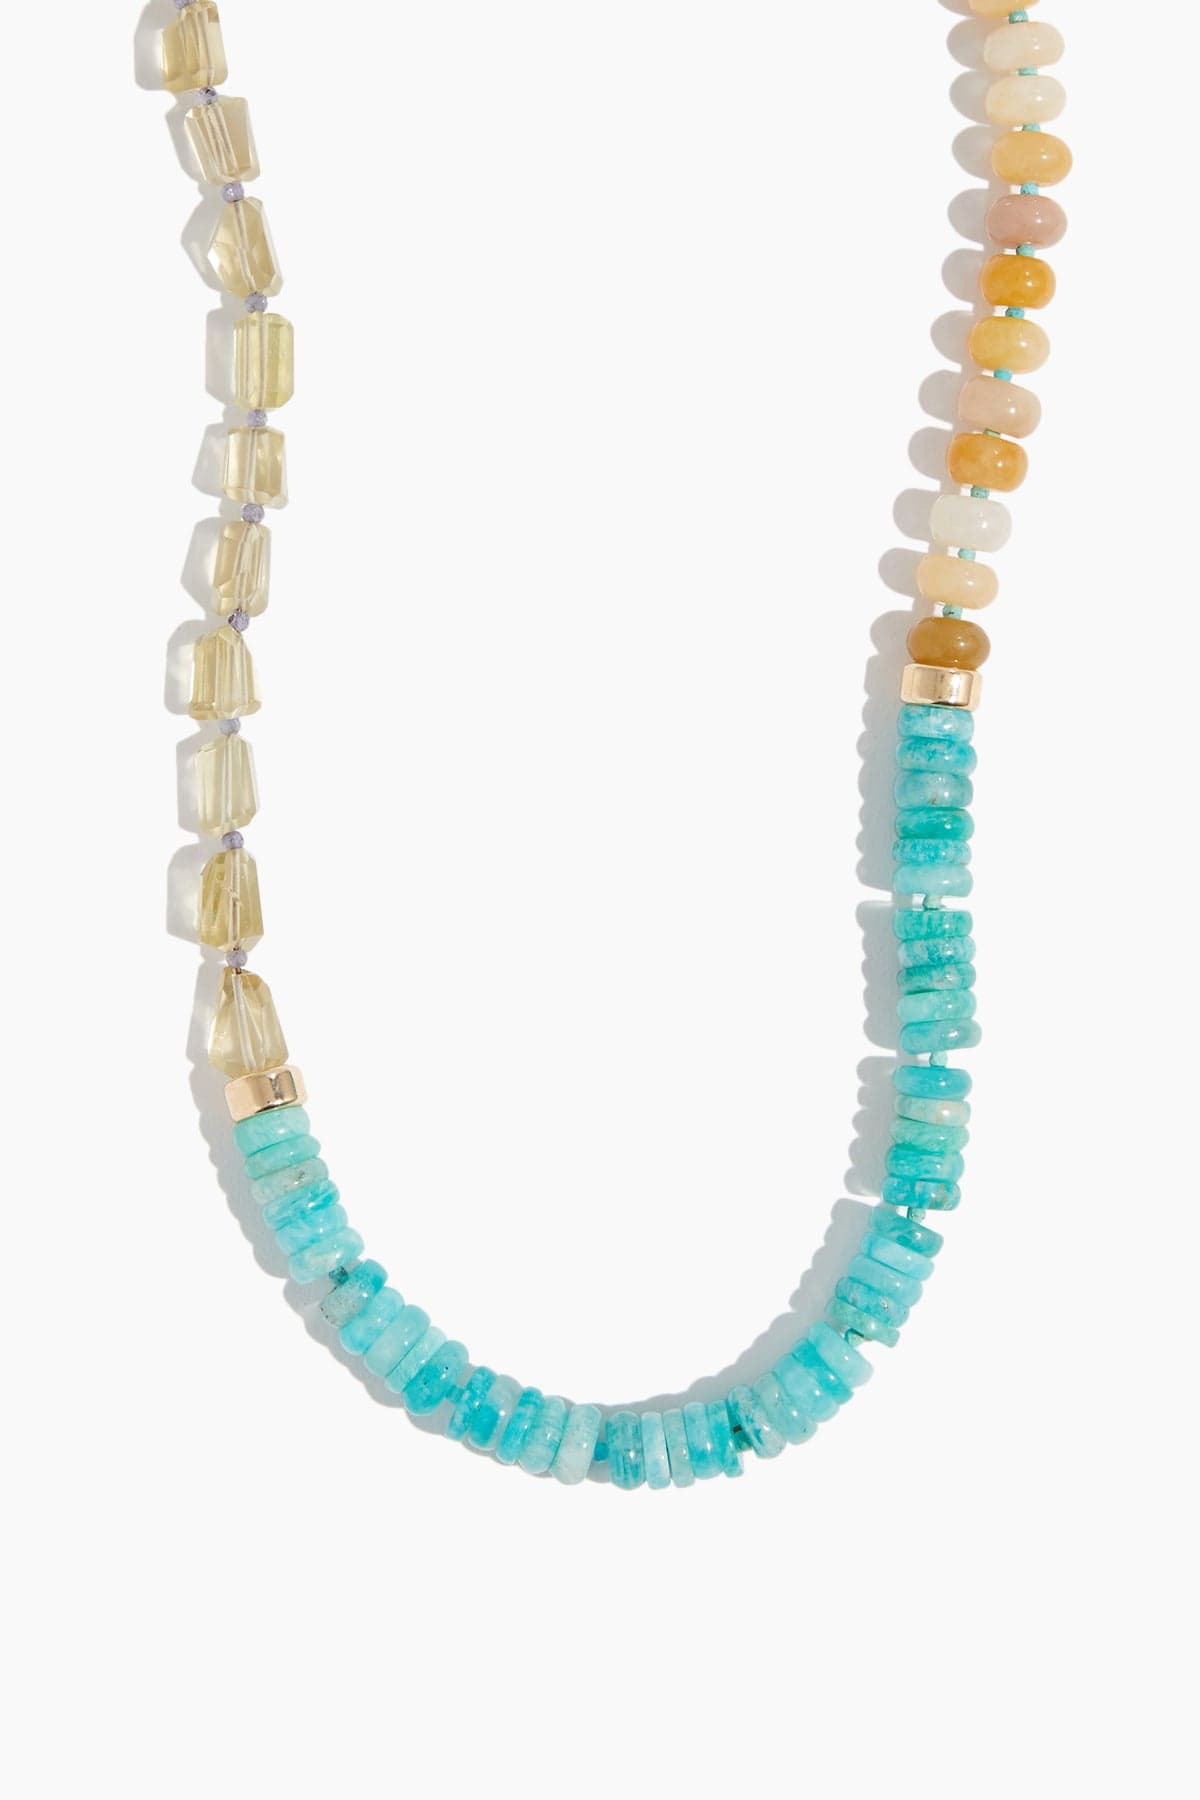 Lizzie Fortunato Necklaces Chama Necklace In Seaside